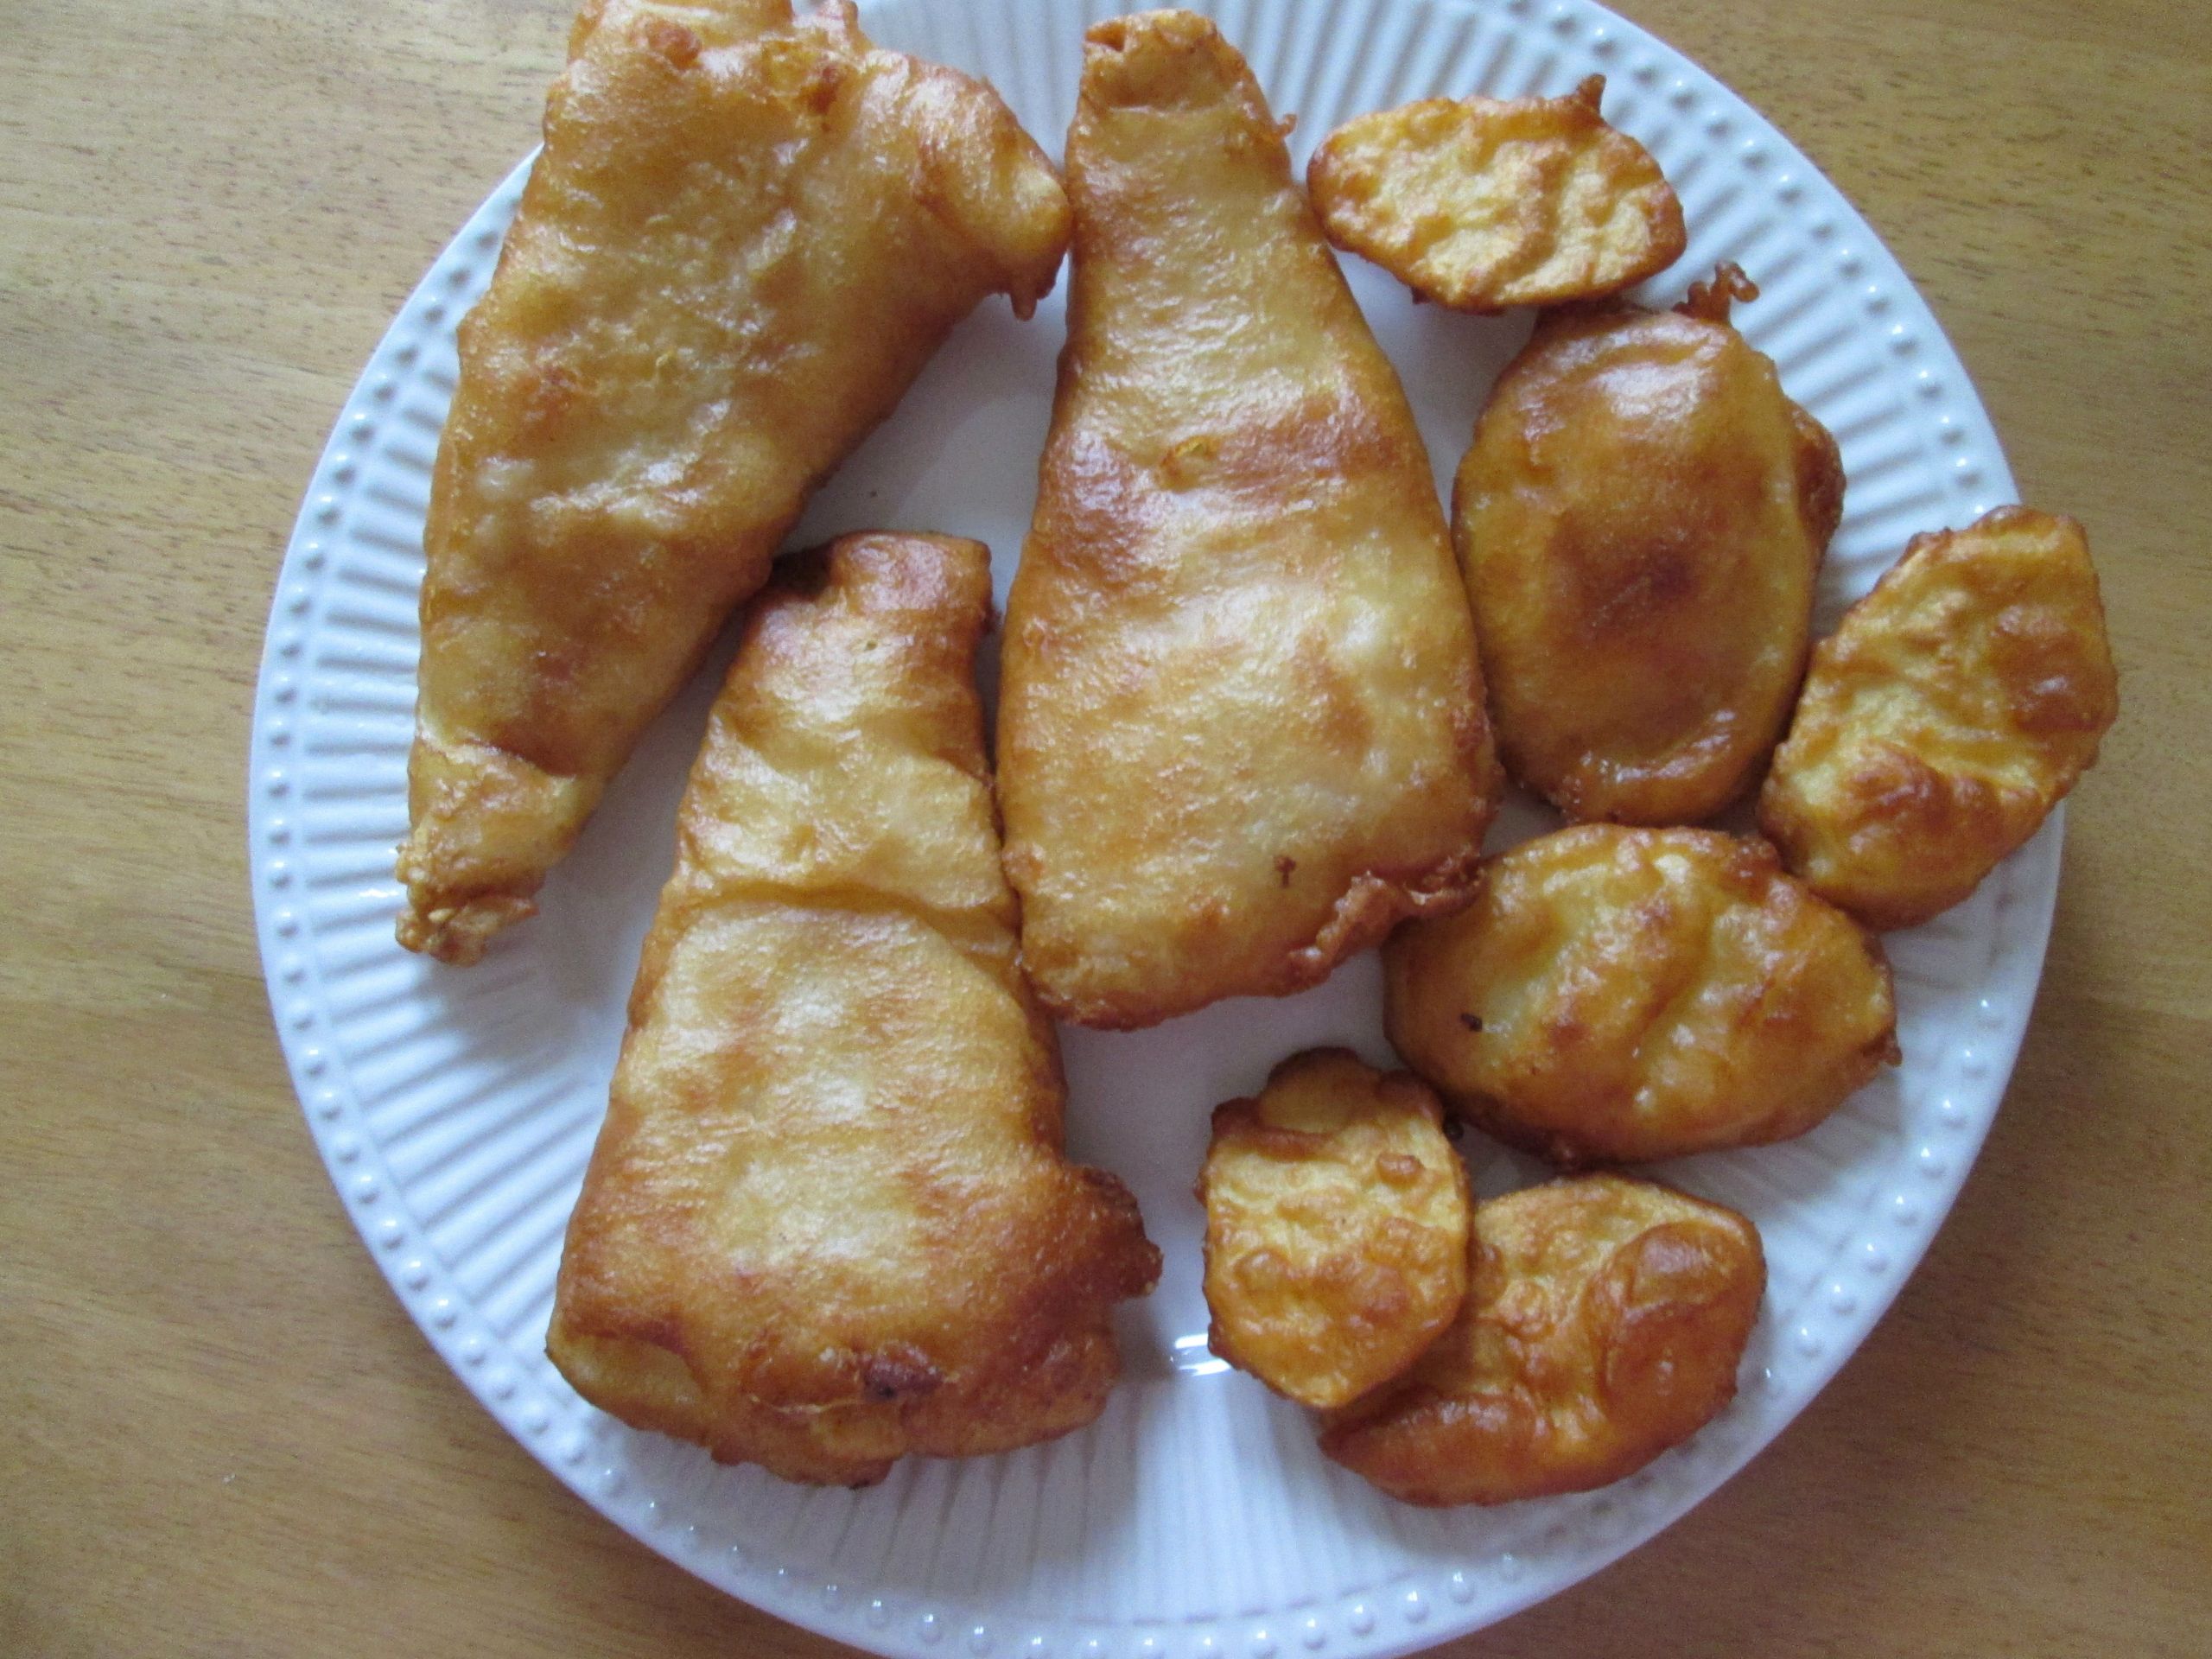 Recipes For Beer Battered Fish
 Beer batter for fish recipe All recipes UK